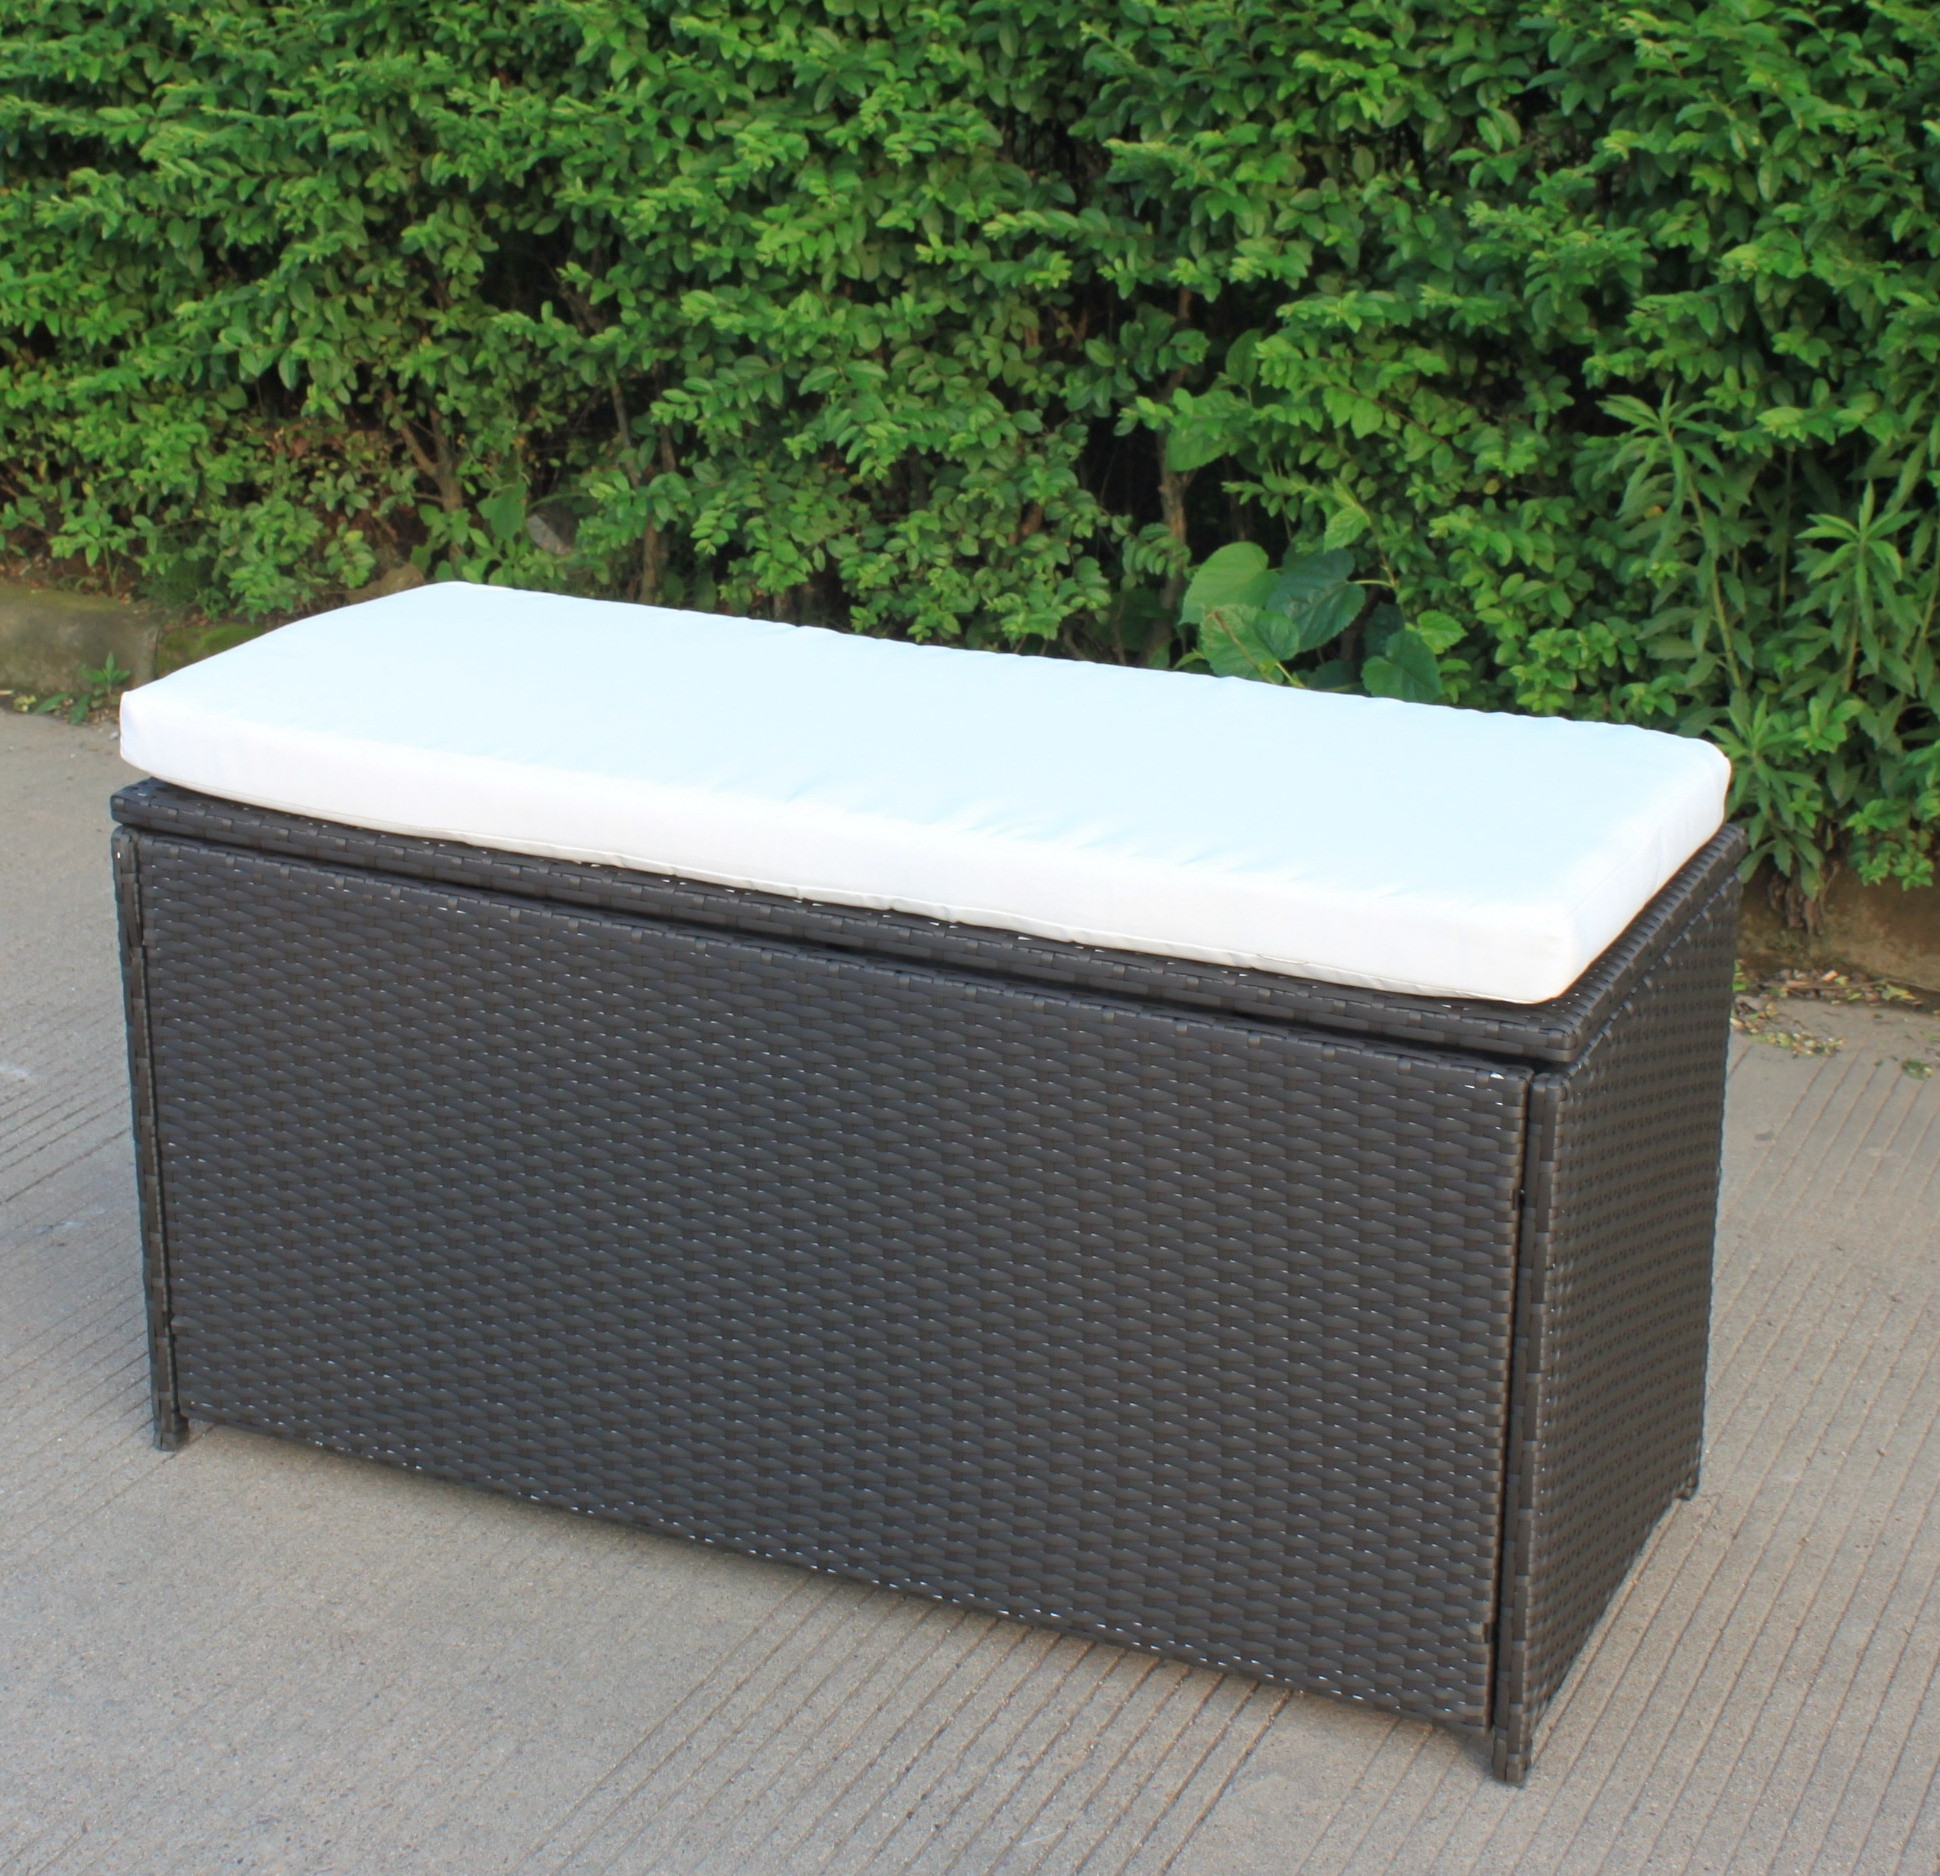 Outdoor Storage Bench With Cushion
 Cushion Storage Bench Outdoor